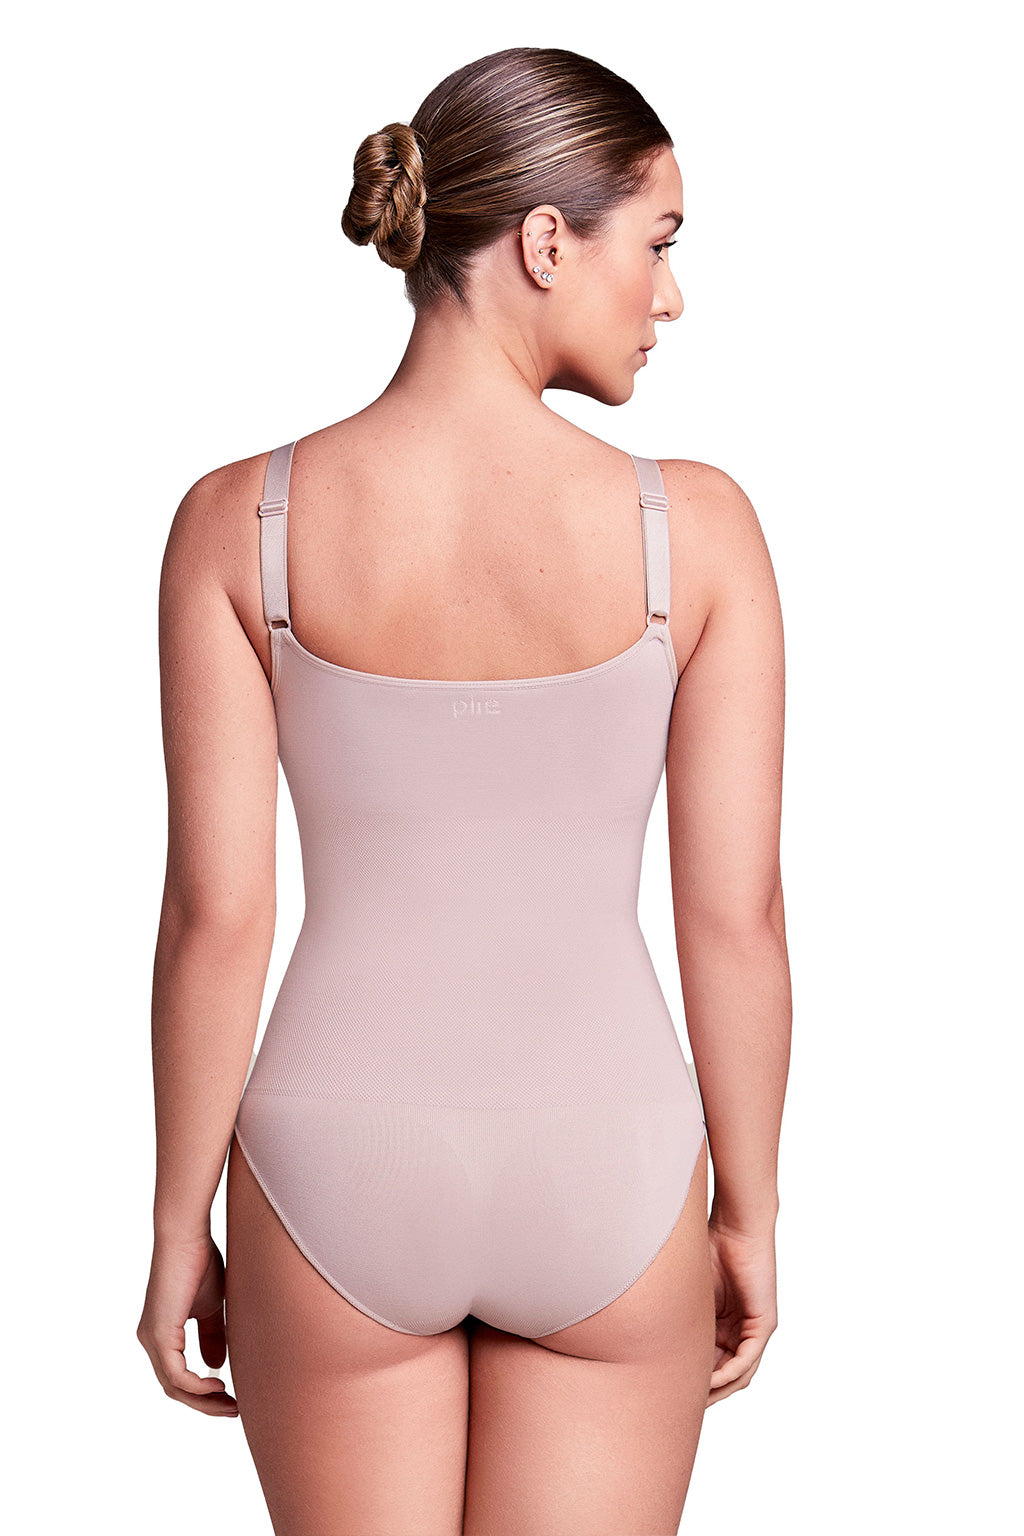 Post-surgery Compression Body with a Velcro fastening - METRO BRAZIL